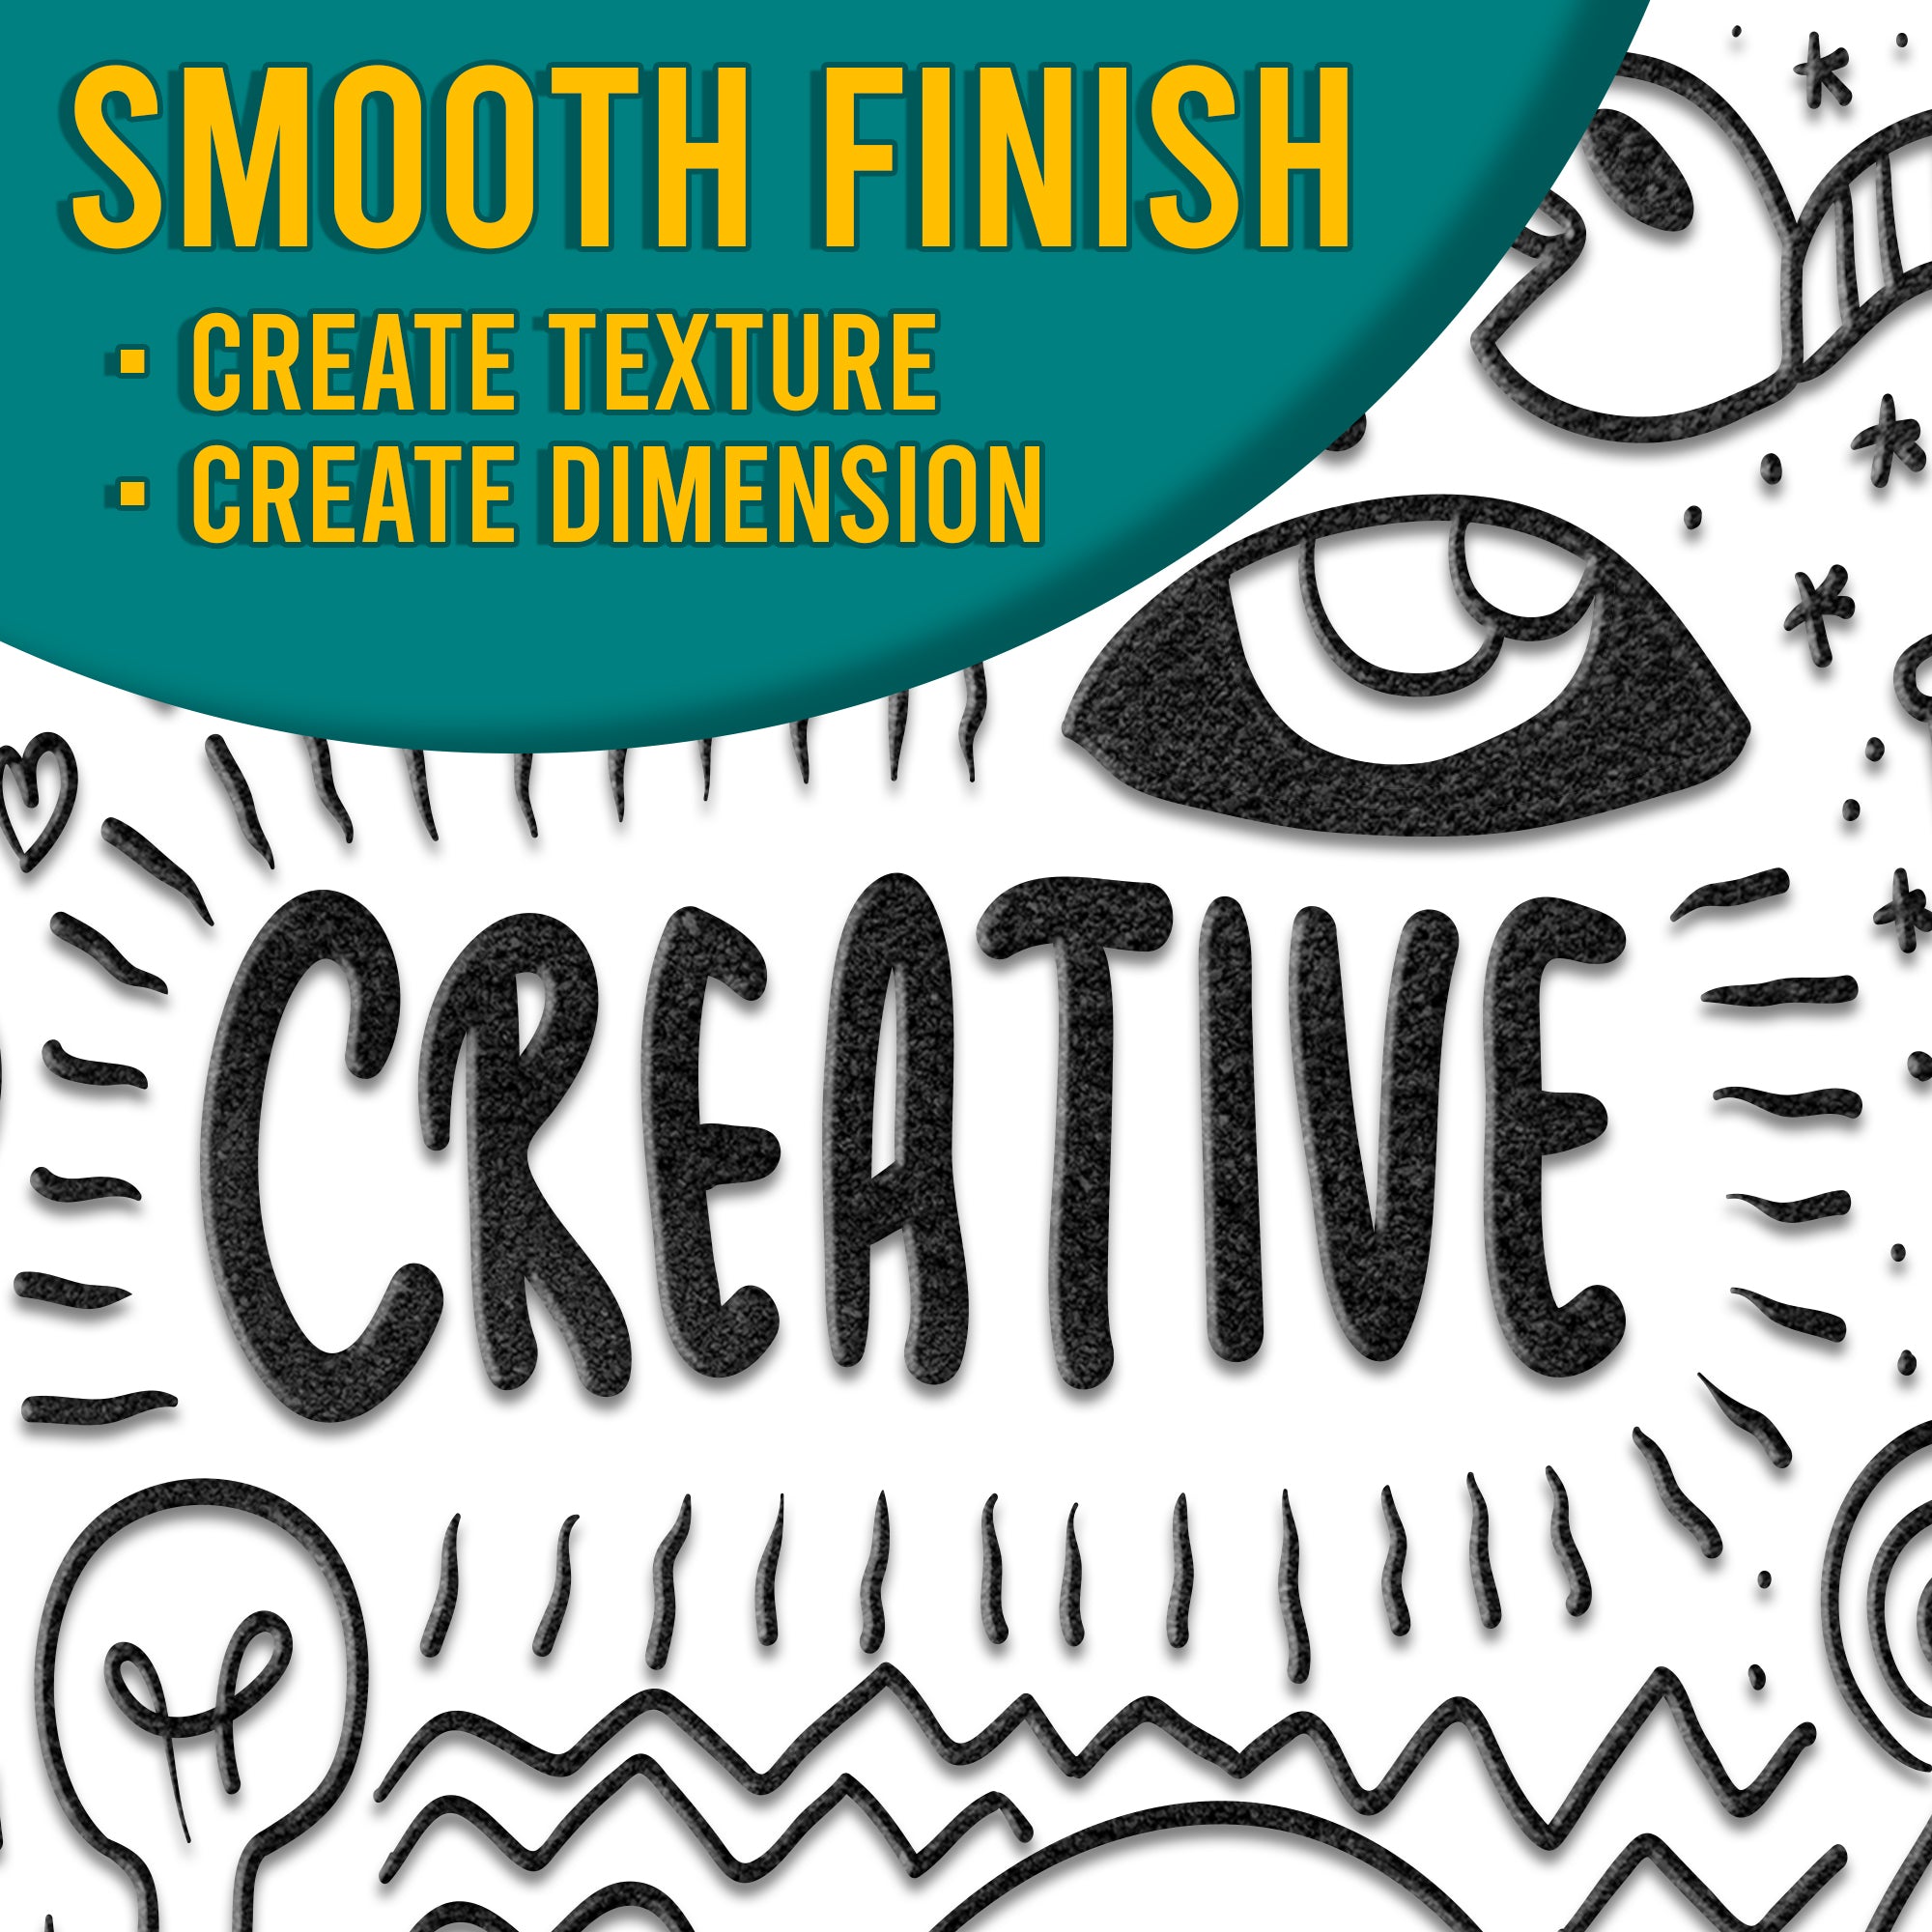 Visual demonstration of the smooth finish of Black embossing powder, with the text 'Smooth Finish - Create Texture, Create Dimension' overlaying an intricate design.